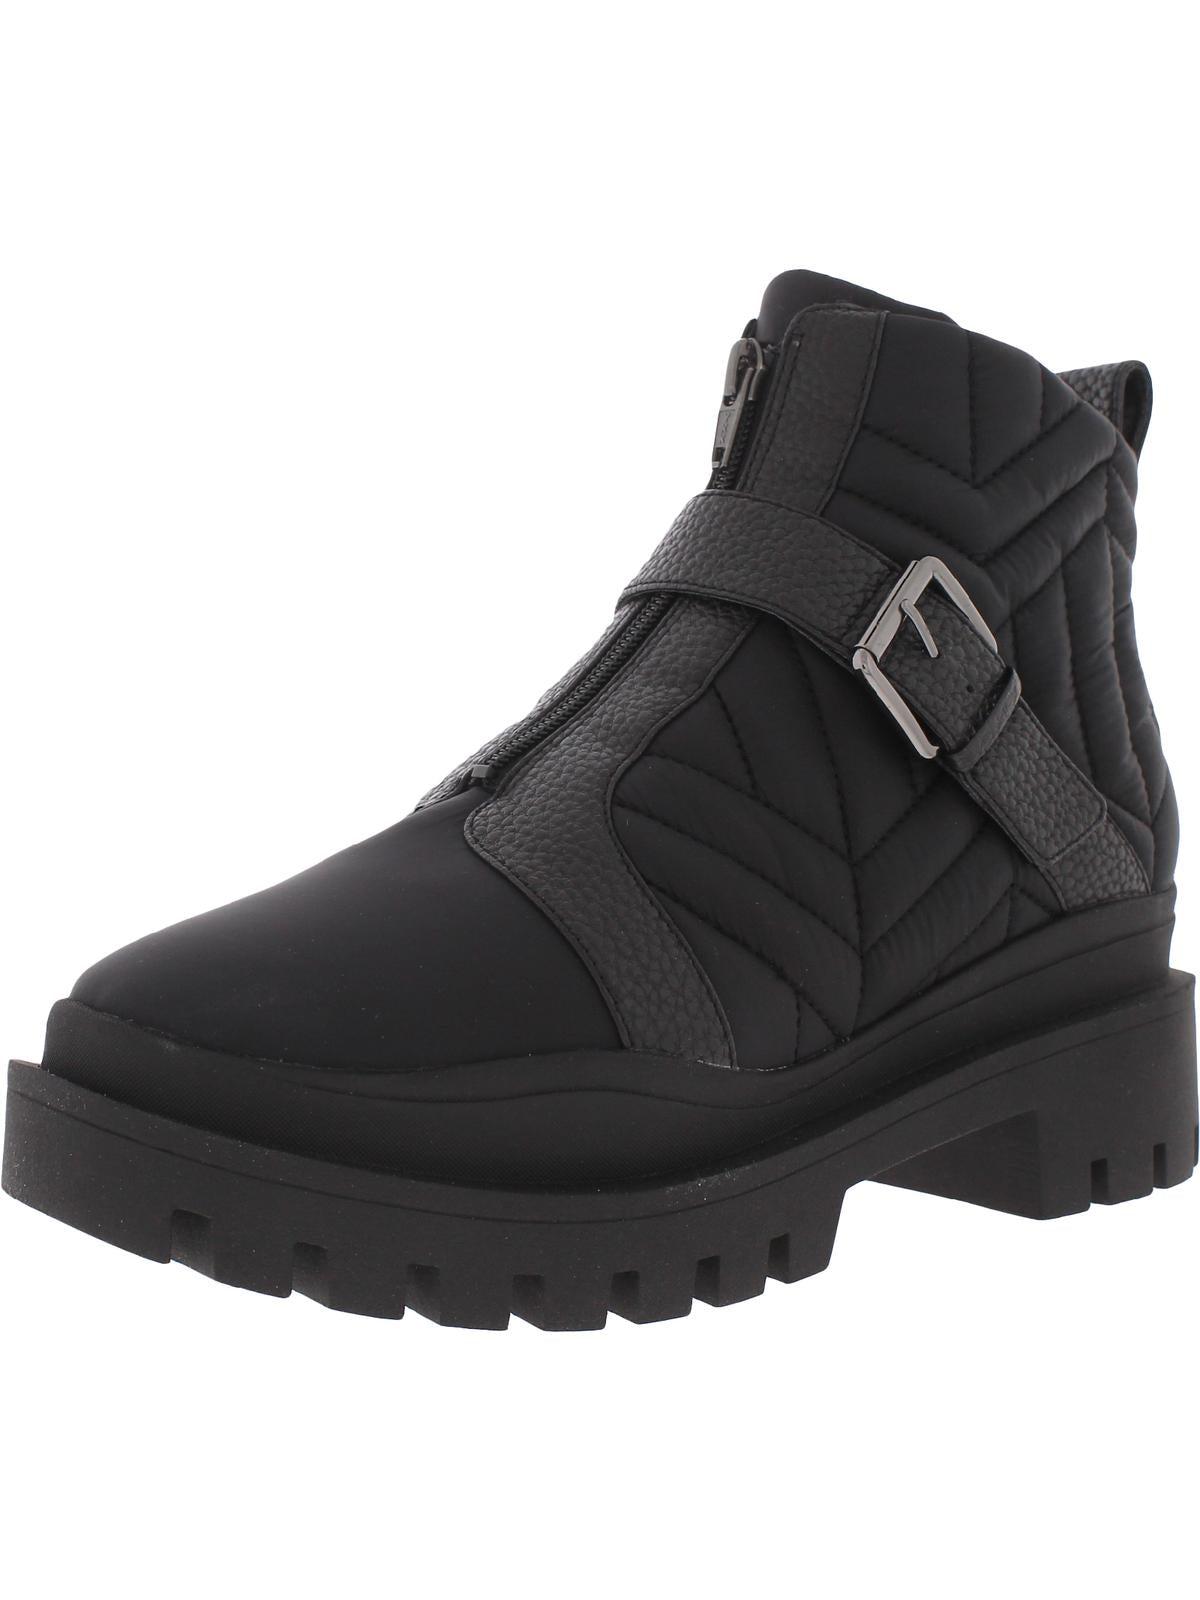 Vionic Janara Faux Trim Quilted Ankle Boots in Black | Lyst